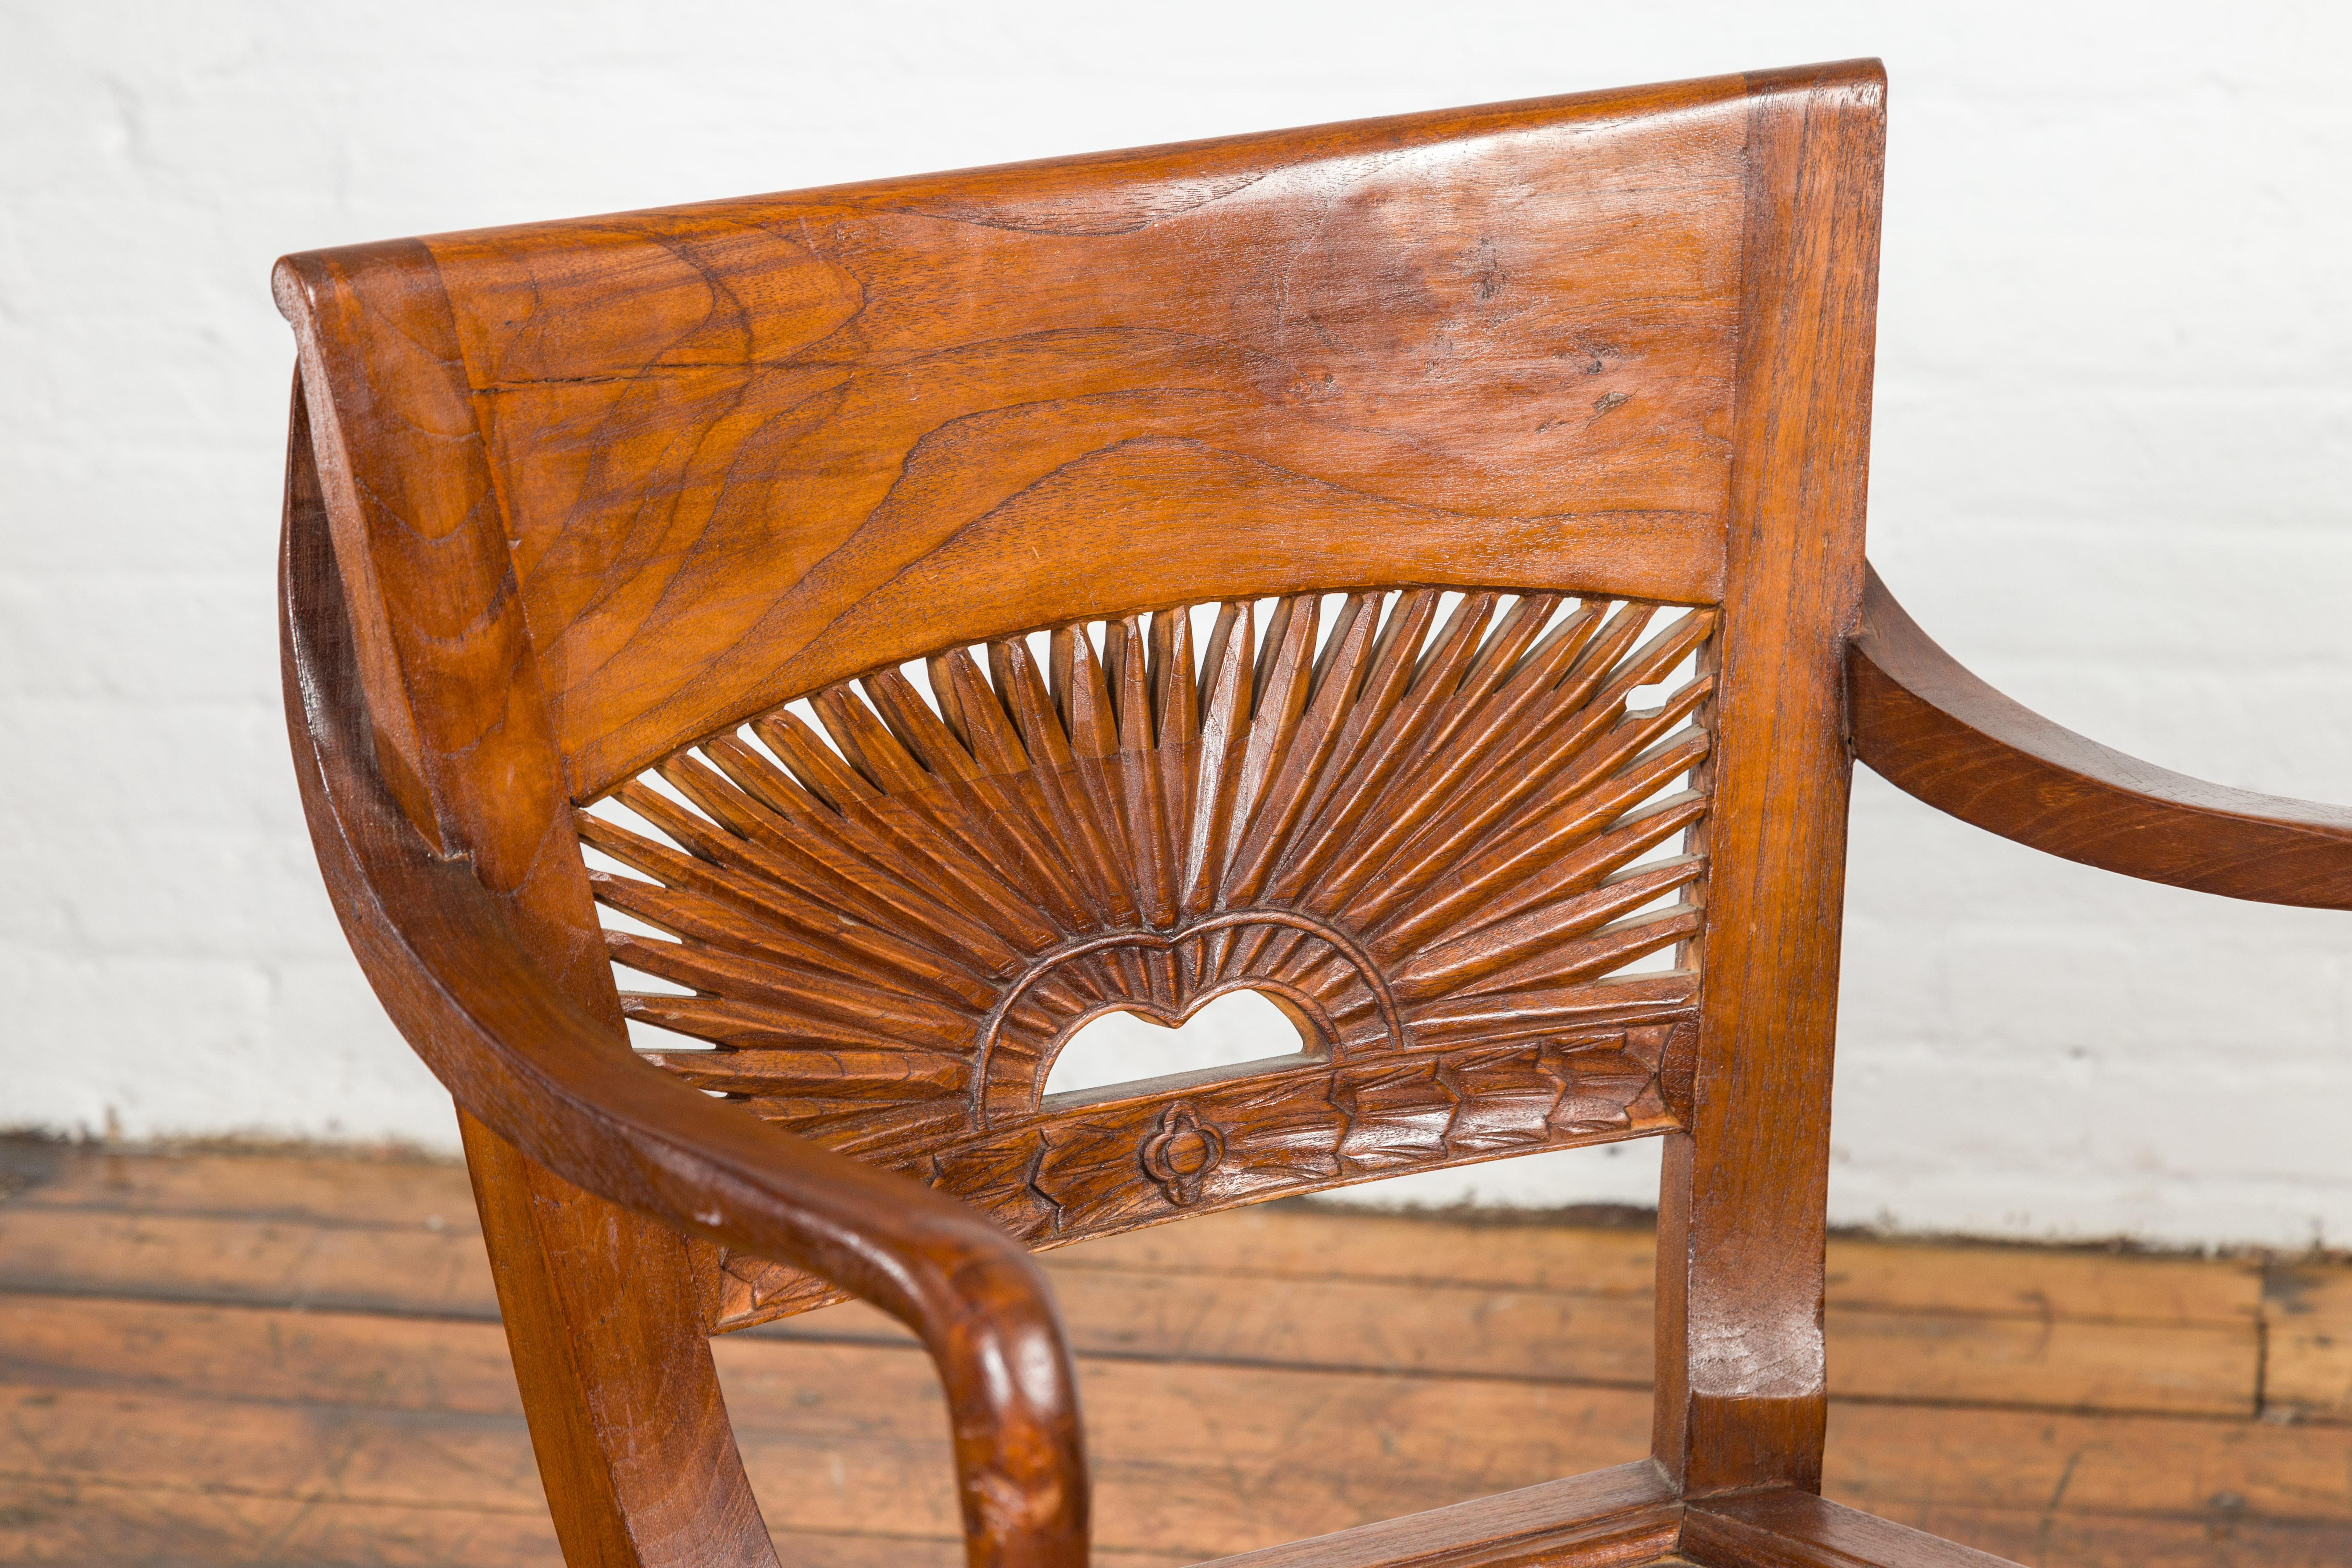 20th Century Dutch Colonial Teak Dining Room Chairs with Carved Radiating Backs, Set of Six For Sale